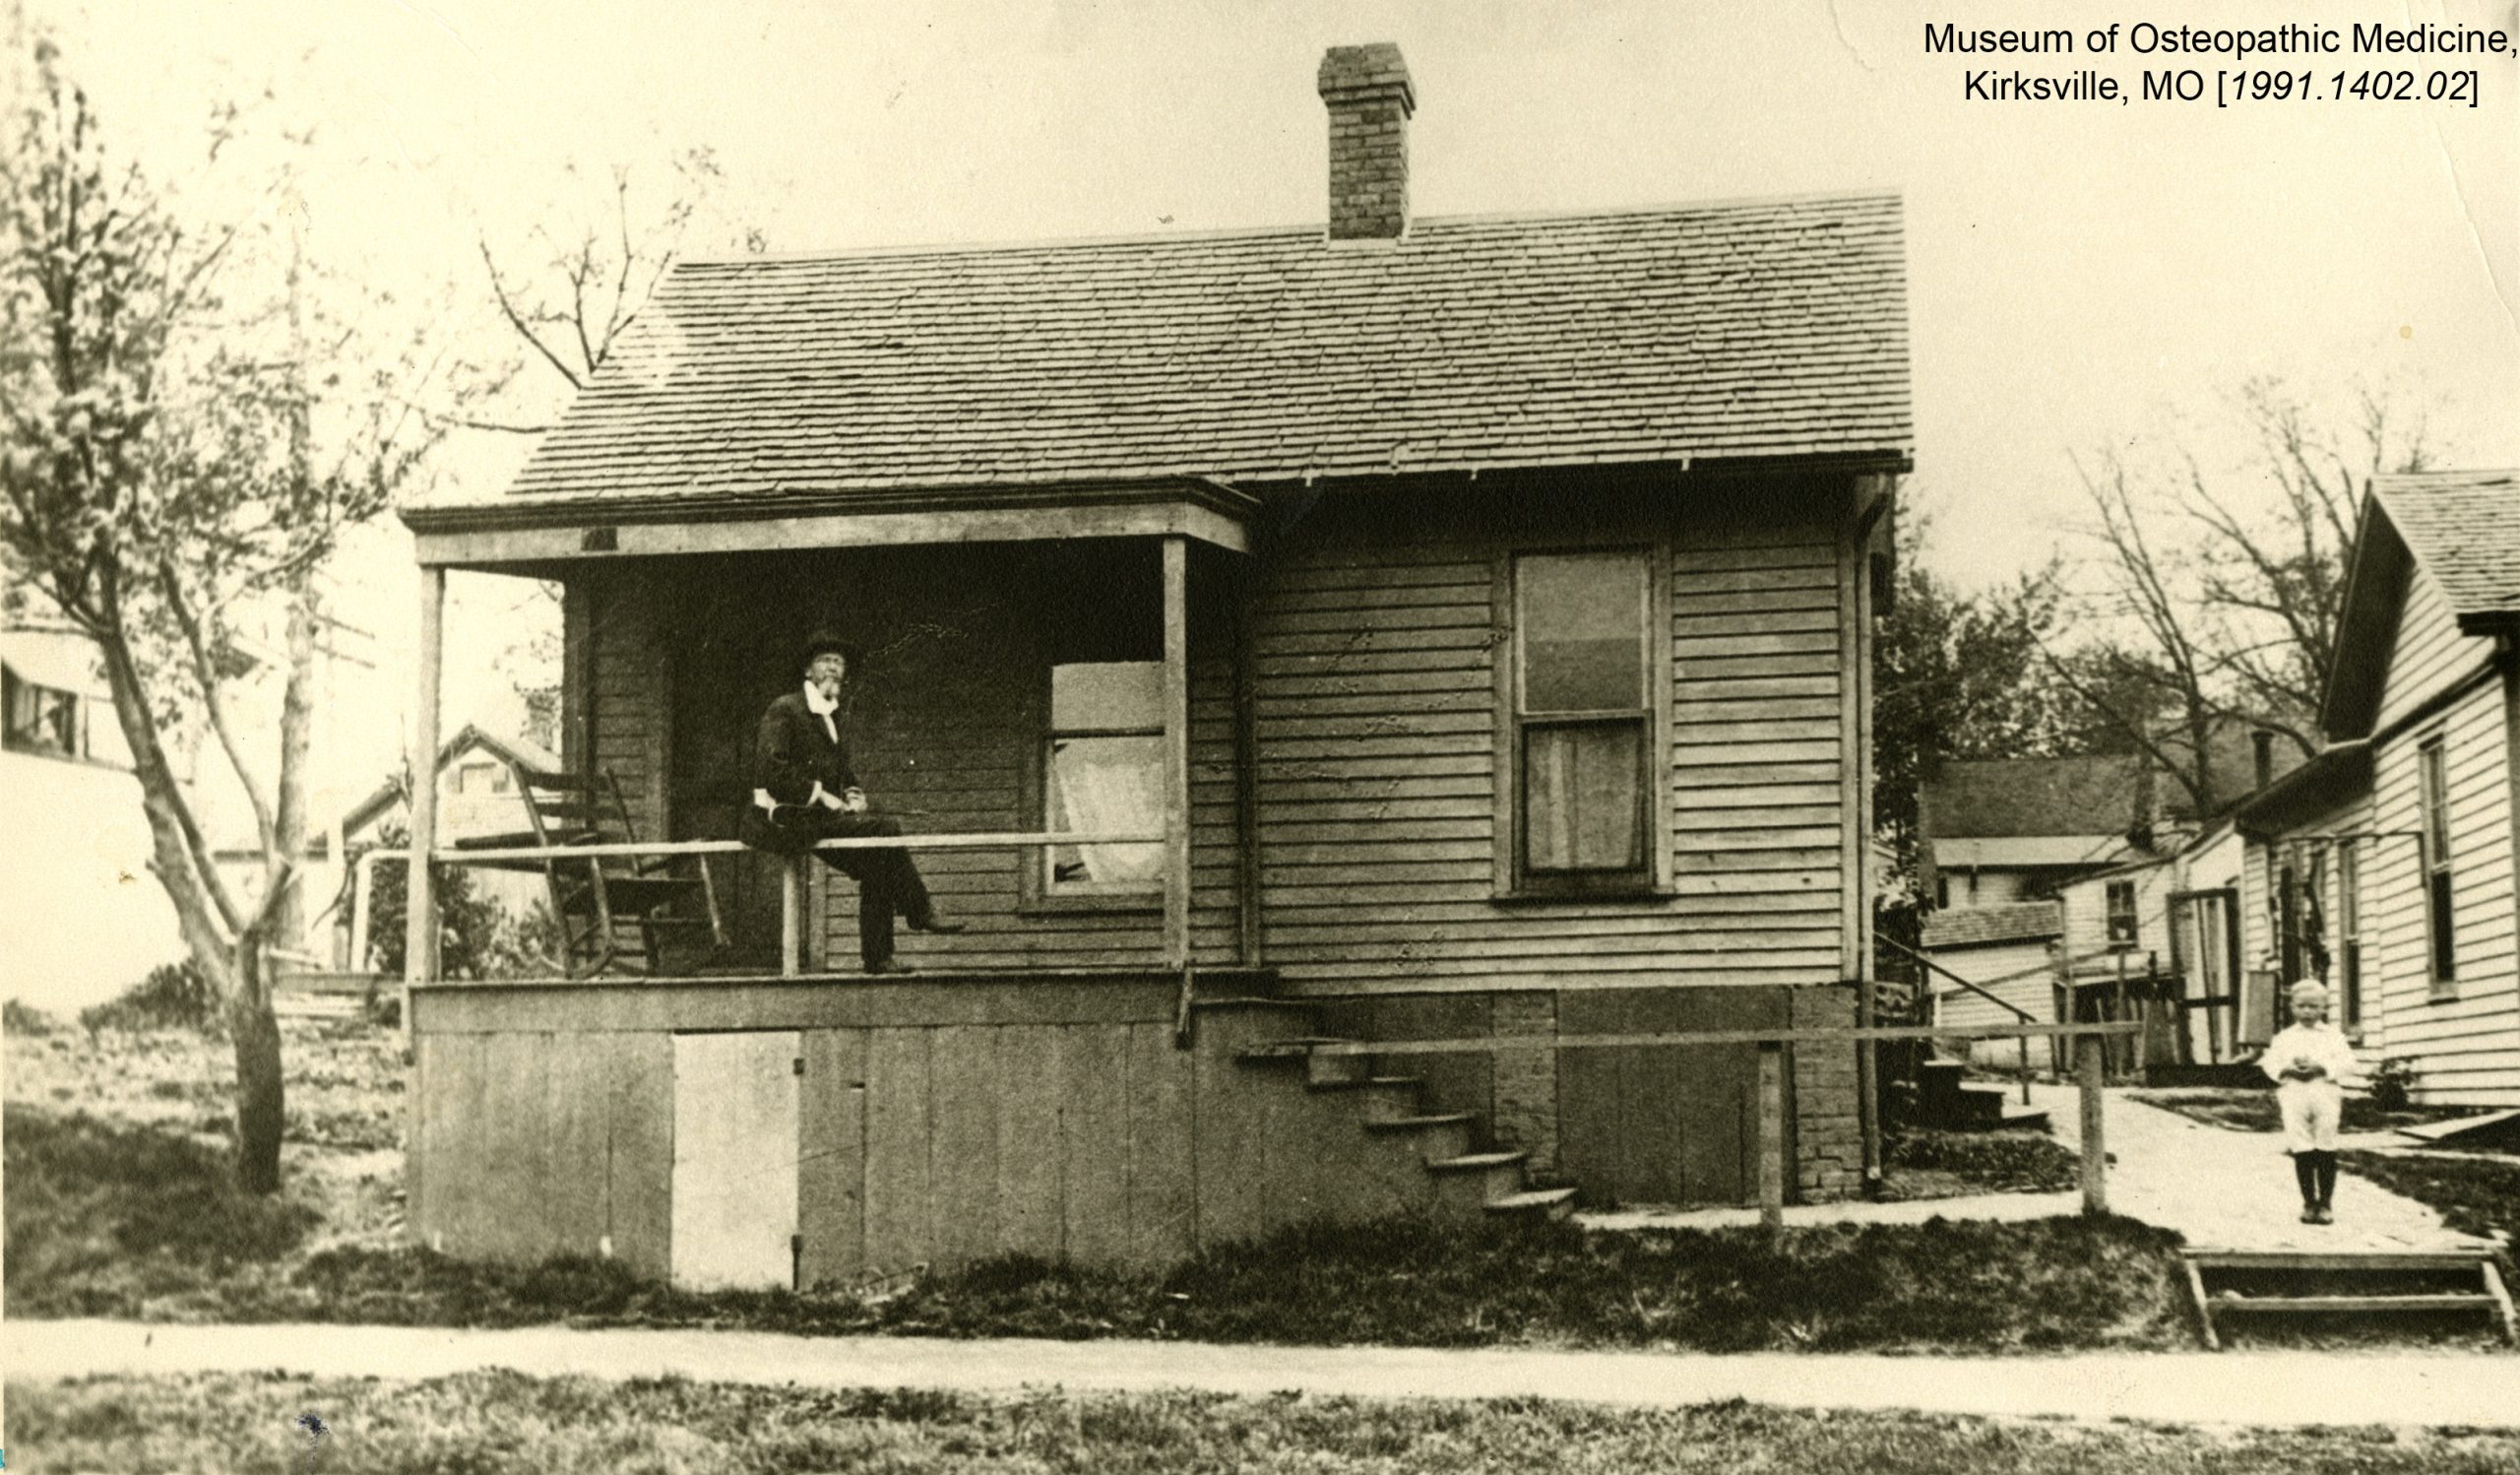 Dr. Still sits on the porch of the first school of osteopathic medicine. Museum of Osteopathic Medicine, Kirksville, Missouri [1991.1402.02]